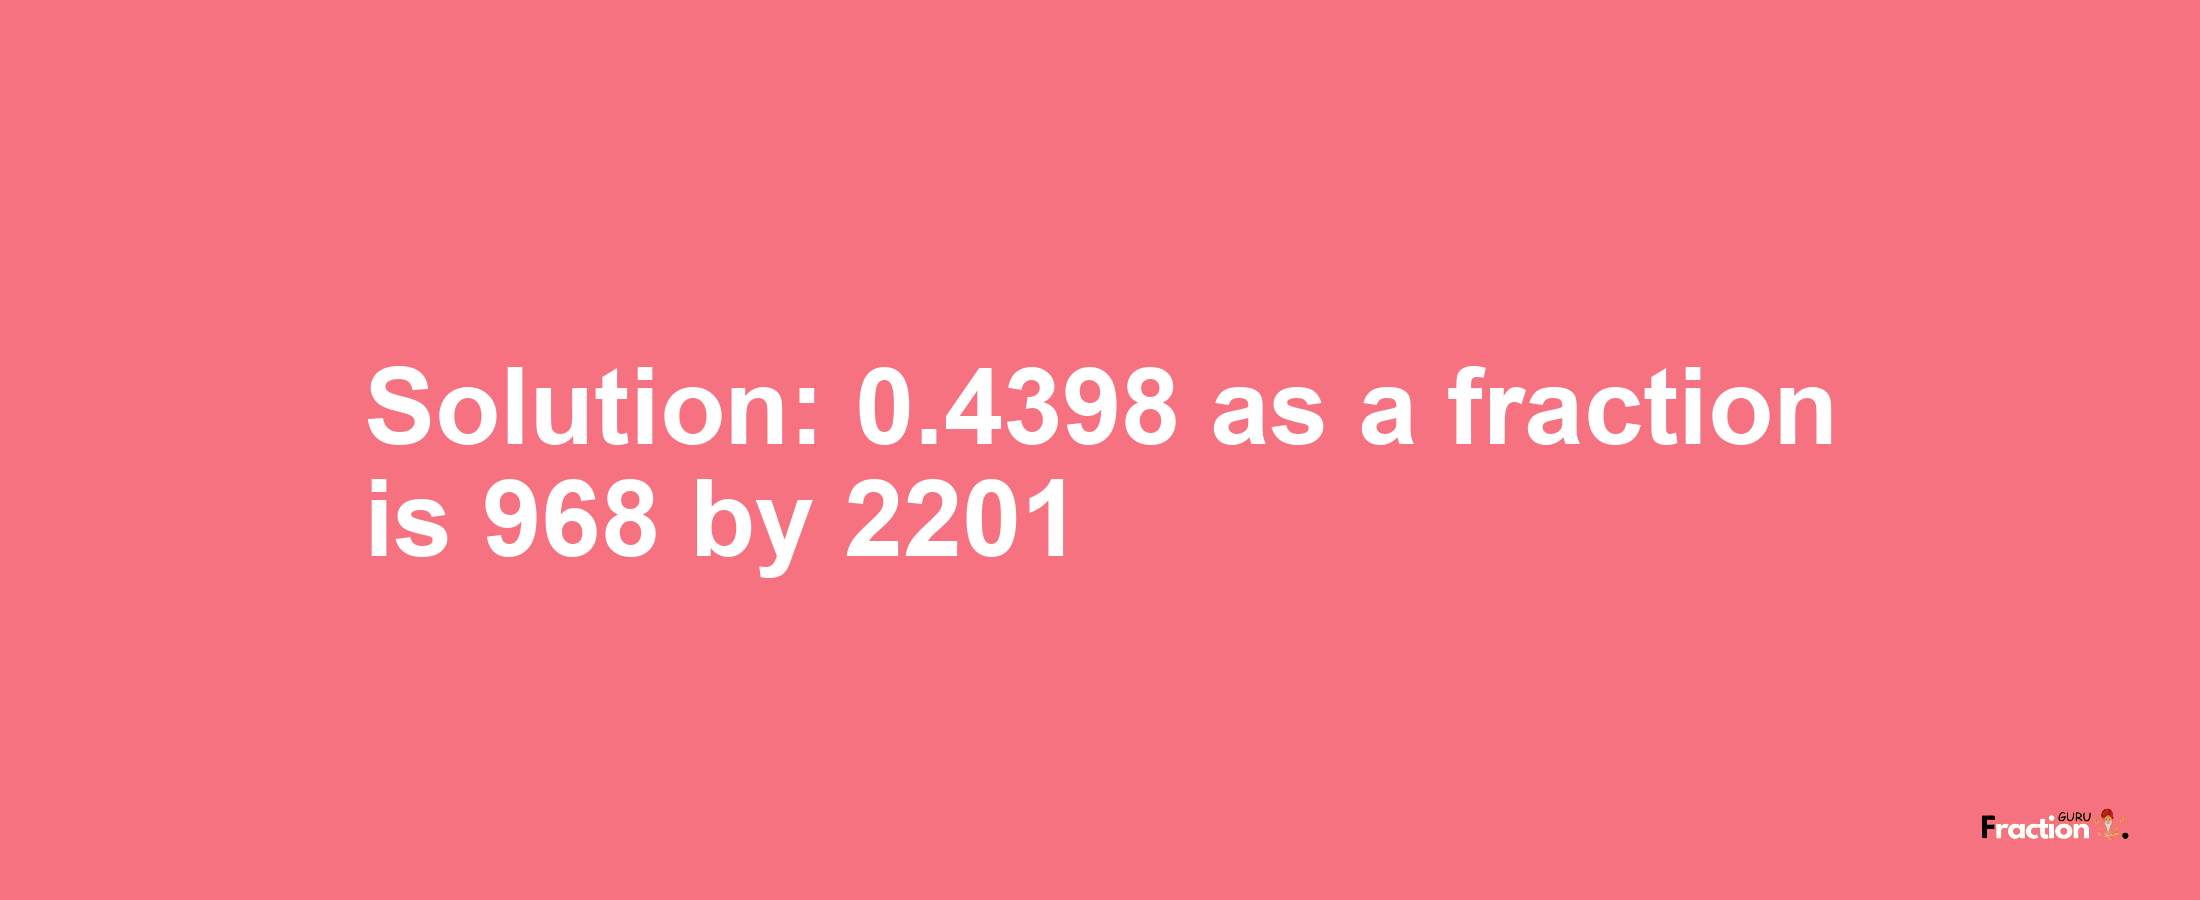 Solution:0.4398 as a fraction is 968/2201